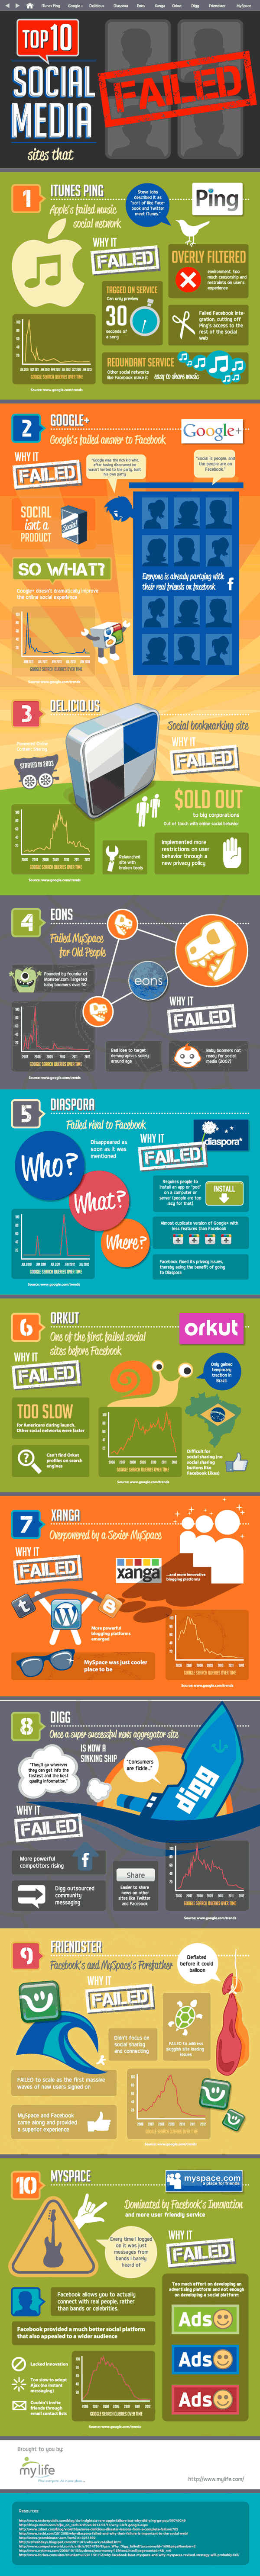 Rejected Social Media Sites-Infographic